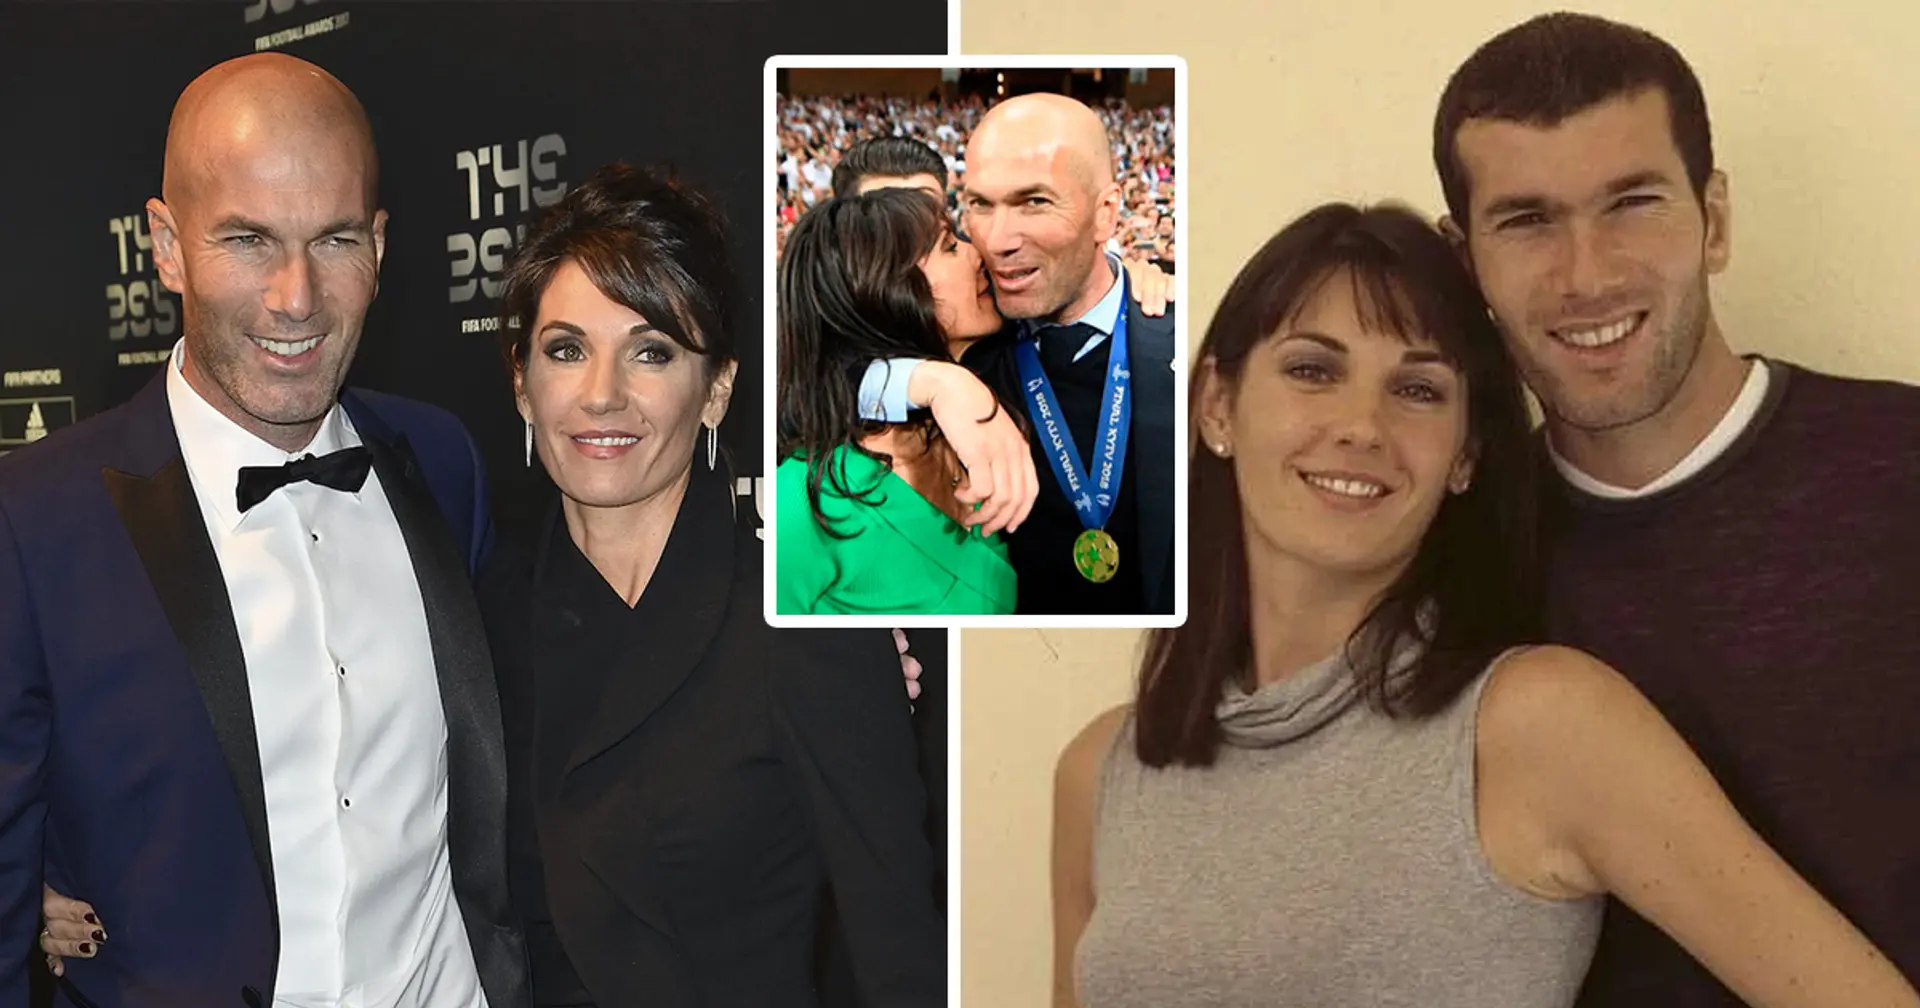 Zidane says he 'would've thrown himself from the top of a building' to impress his missus 